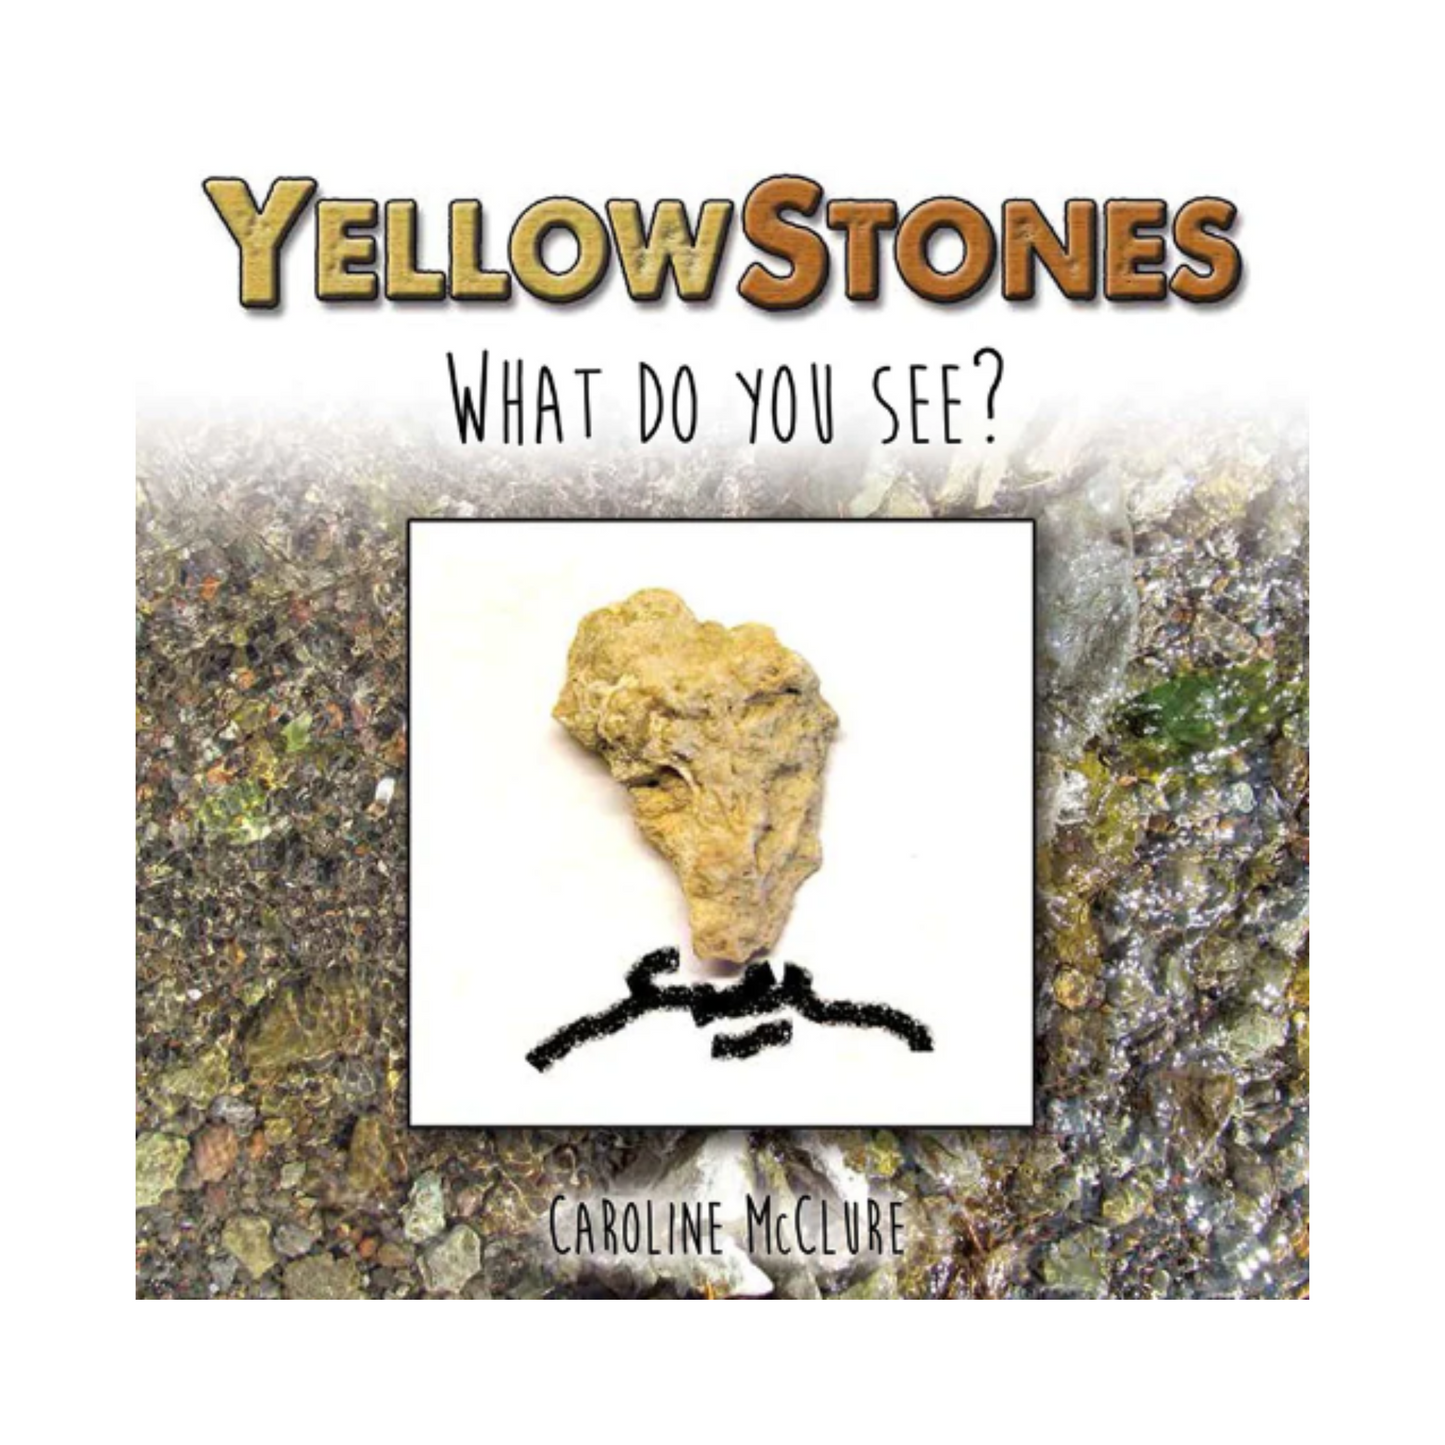 YellowStones: What Do You See?